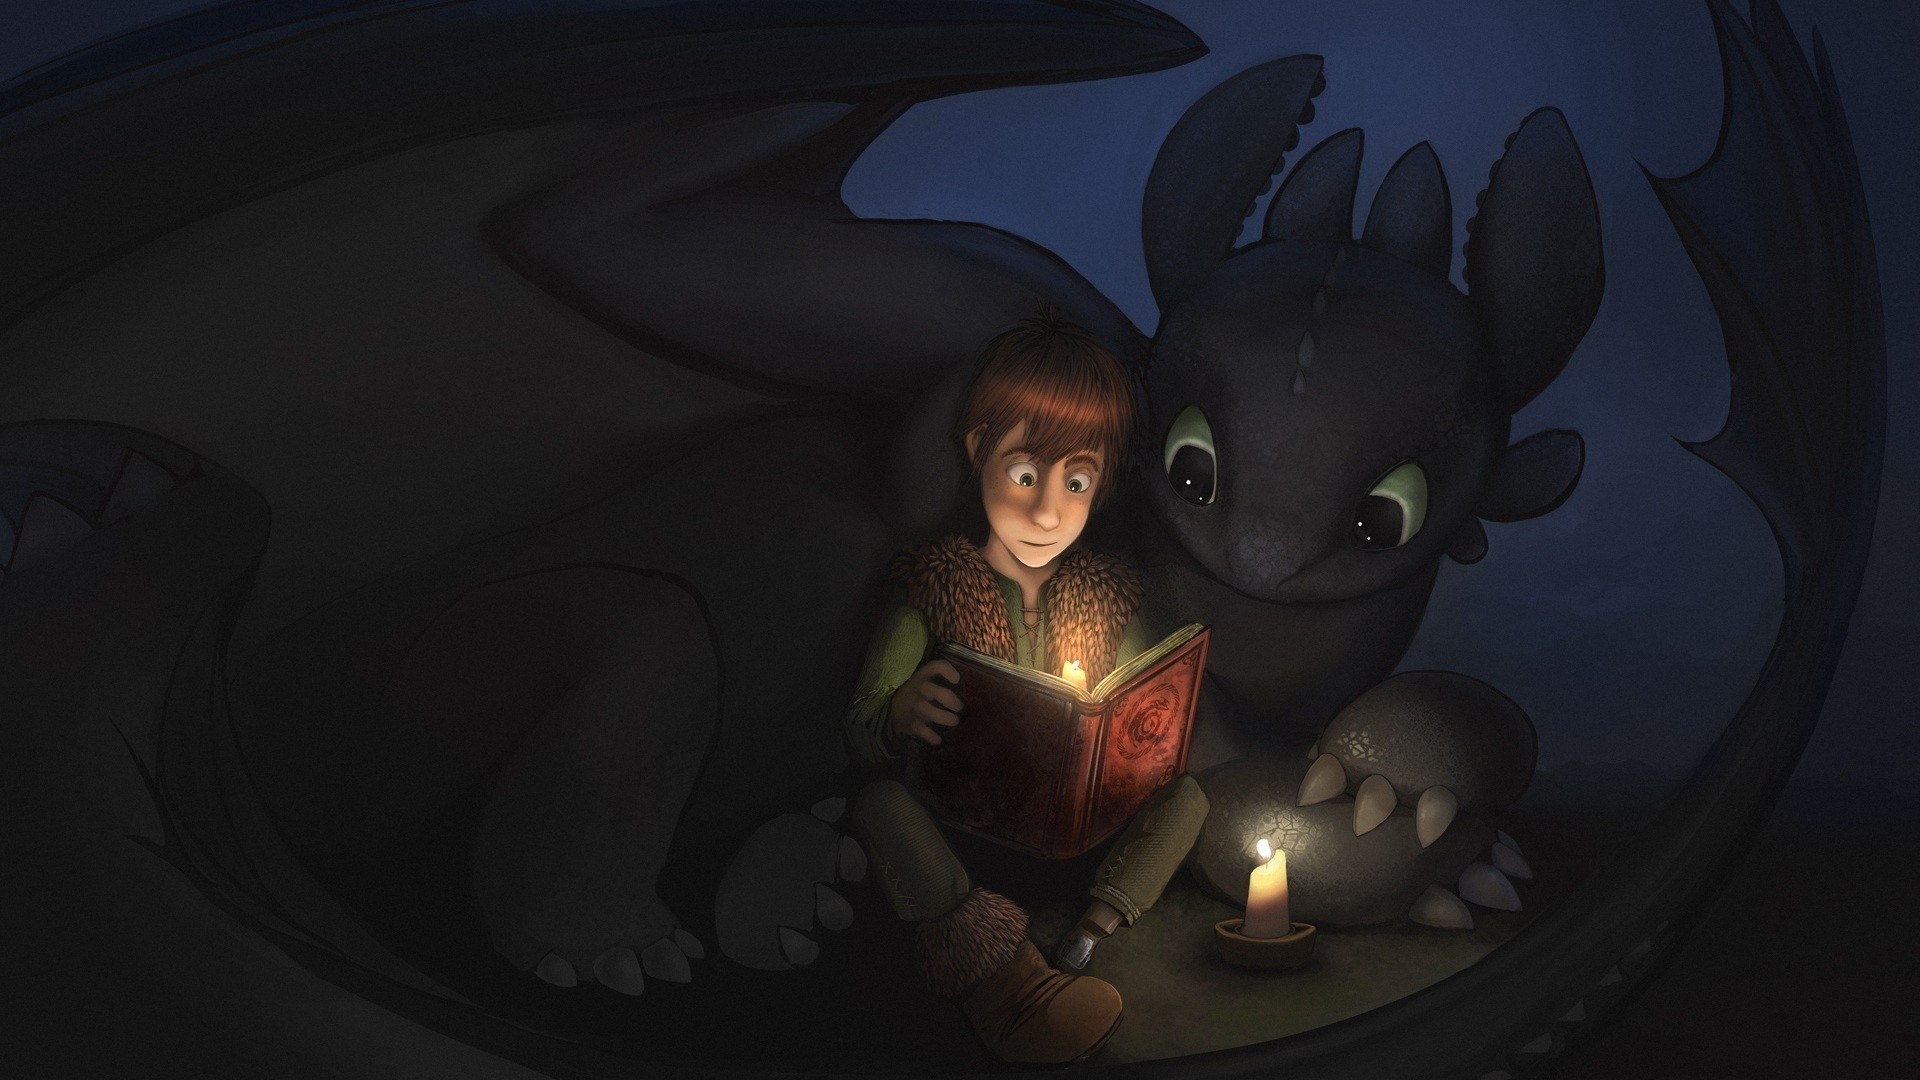 how to train your dragon, toothless (how to train your dragon), movie, hiccup (how to train your dragon)